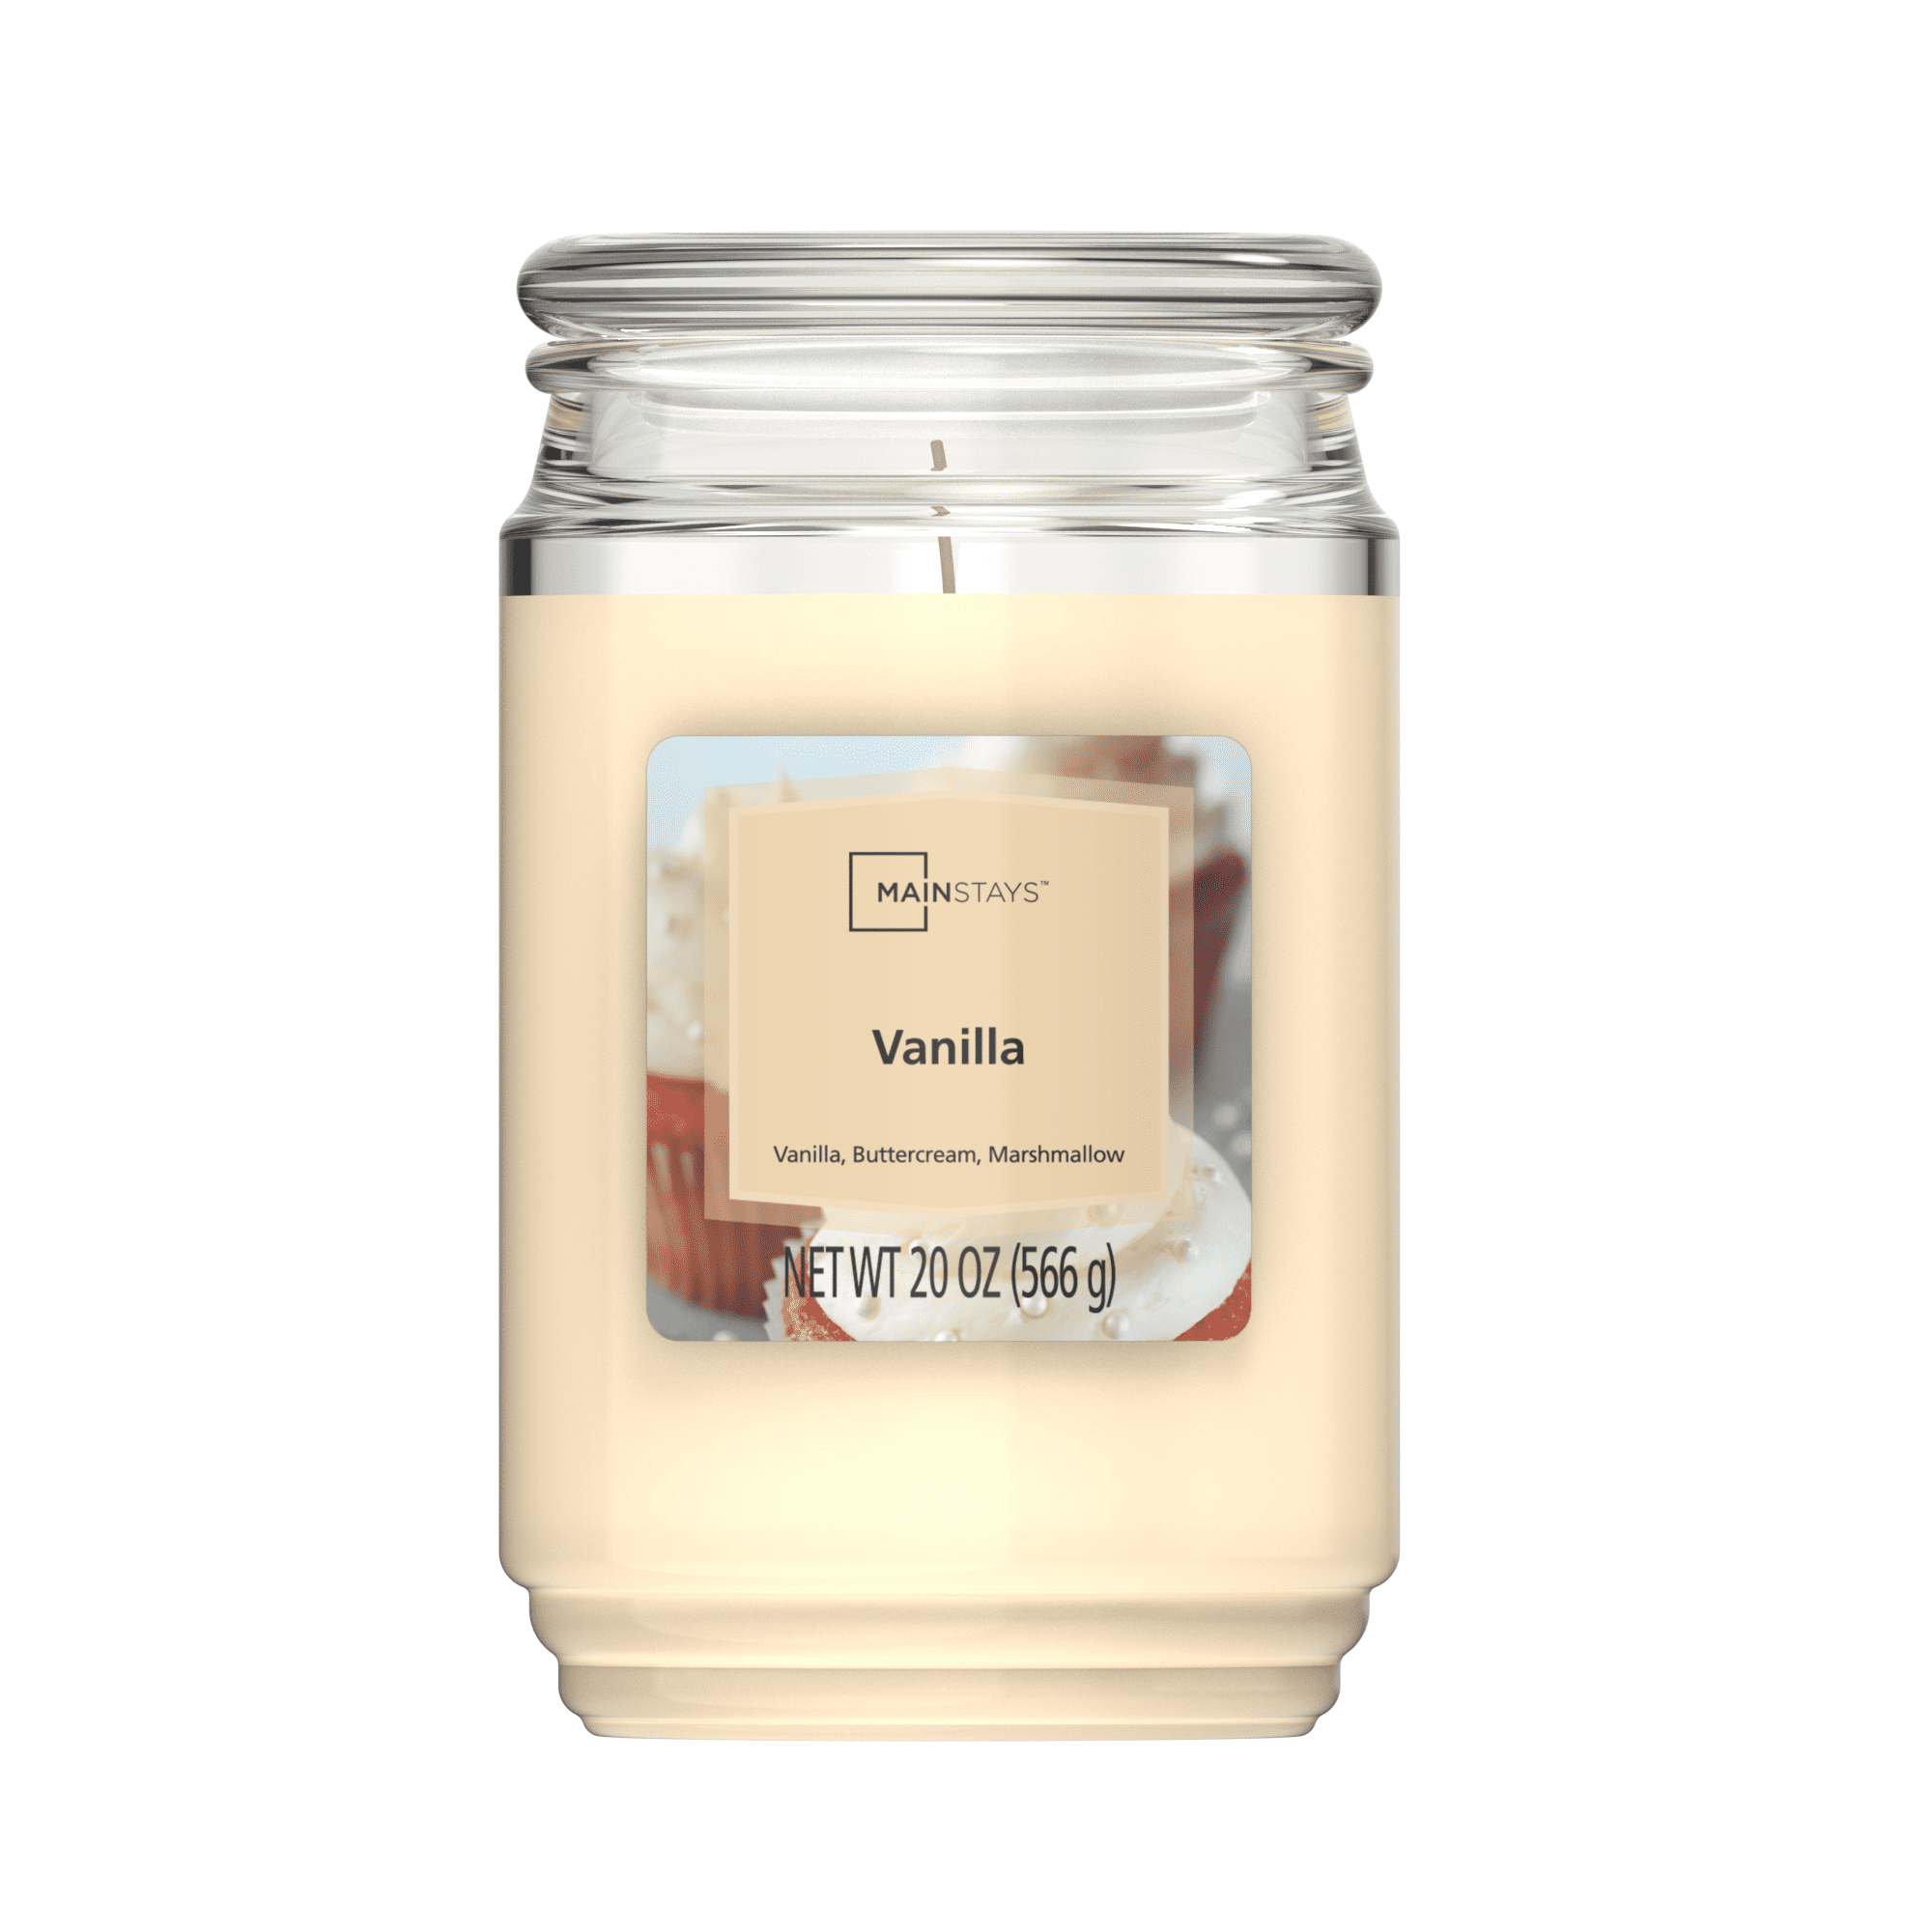 Mainstays Vanilla Scented Single-Wick Large jar Candle, 20 oz.